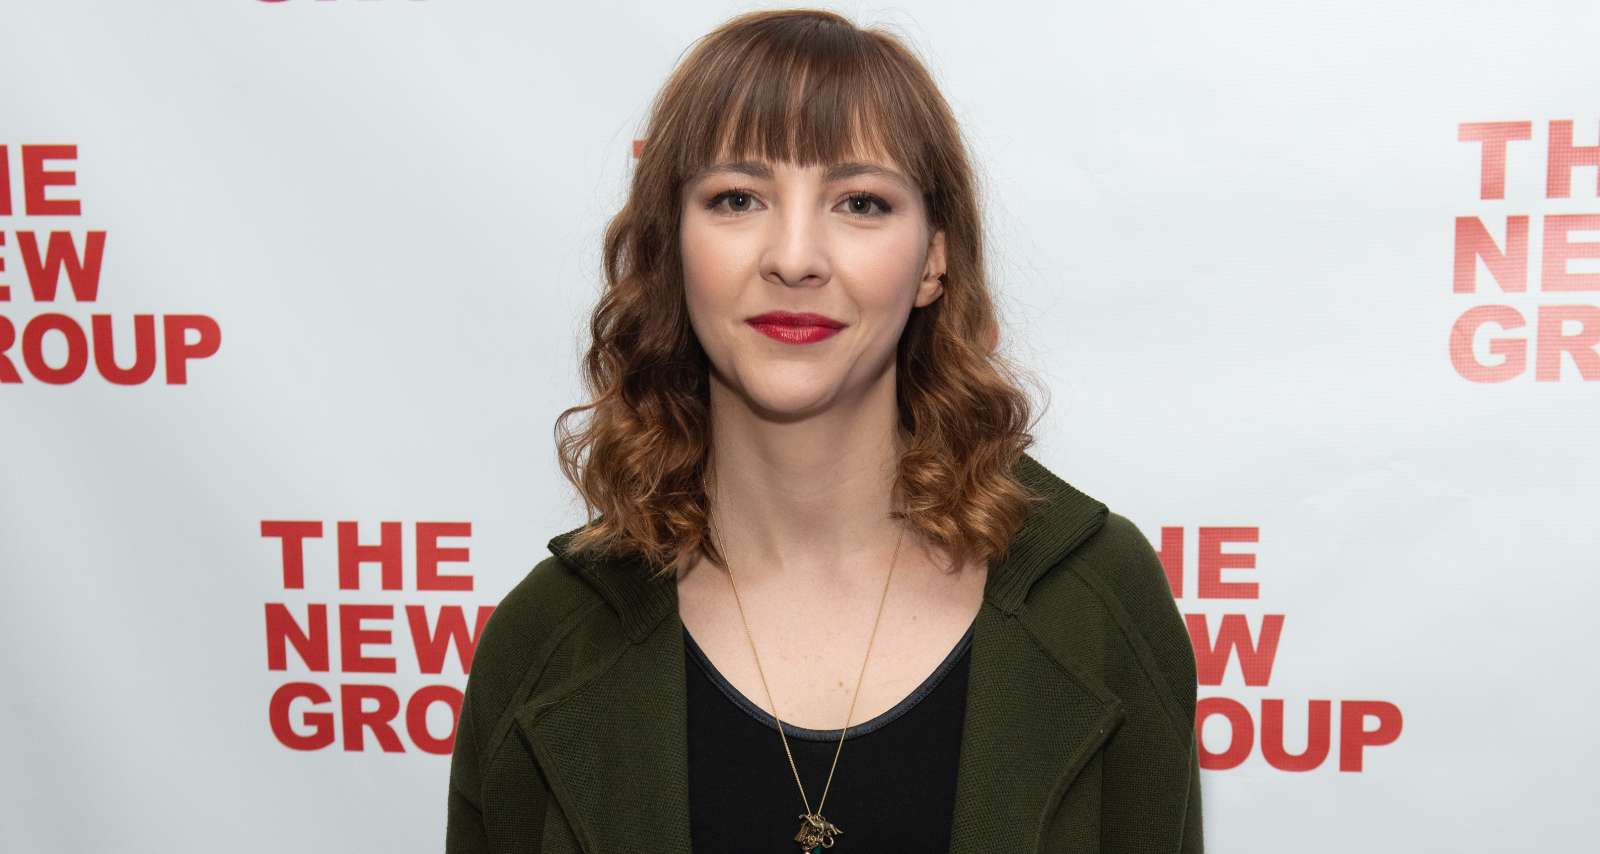 Erin Darke Wiki, Age, Career, Family, Parents, Education, Hometown and Facts About Daniel Radcliffe’s Girlfriend